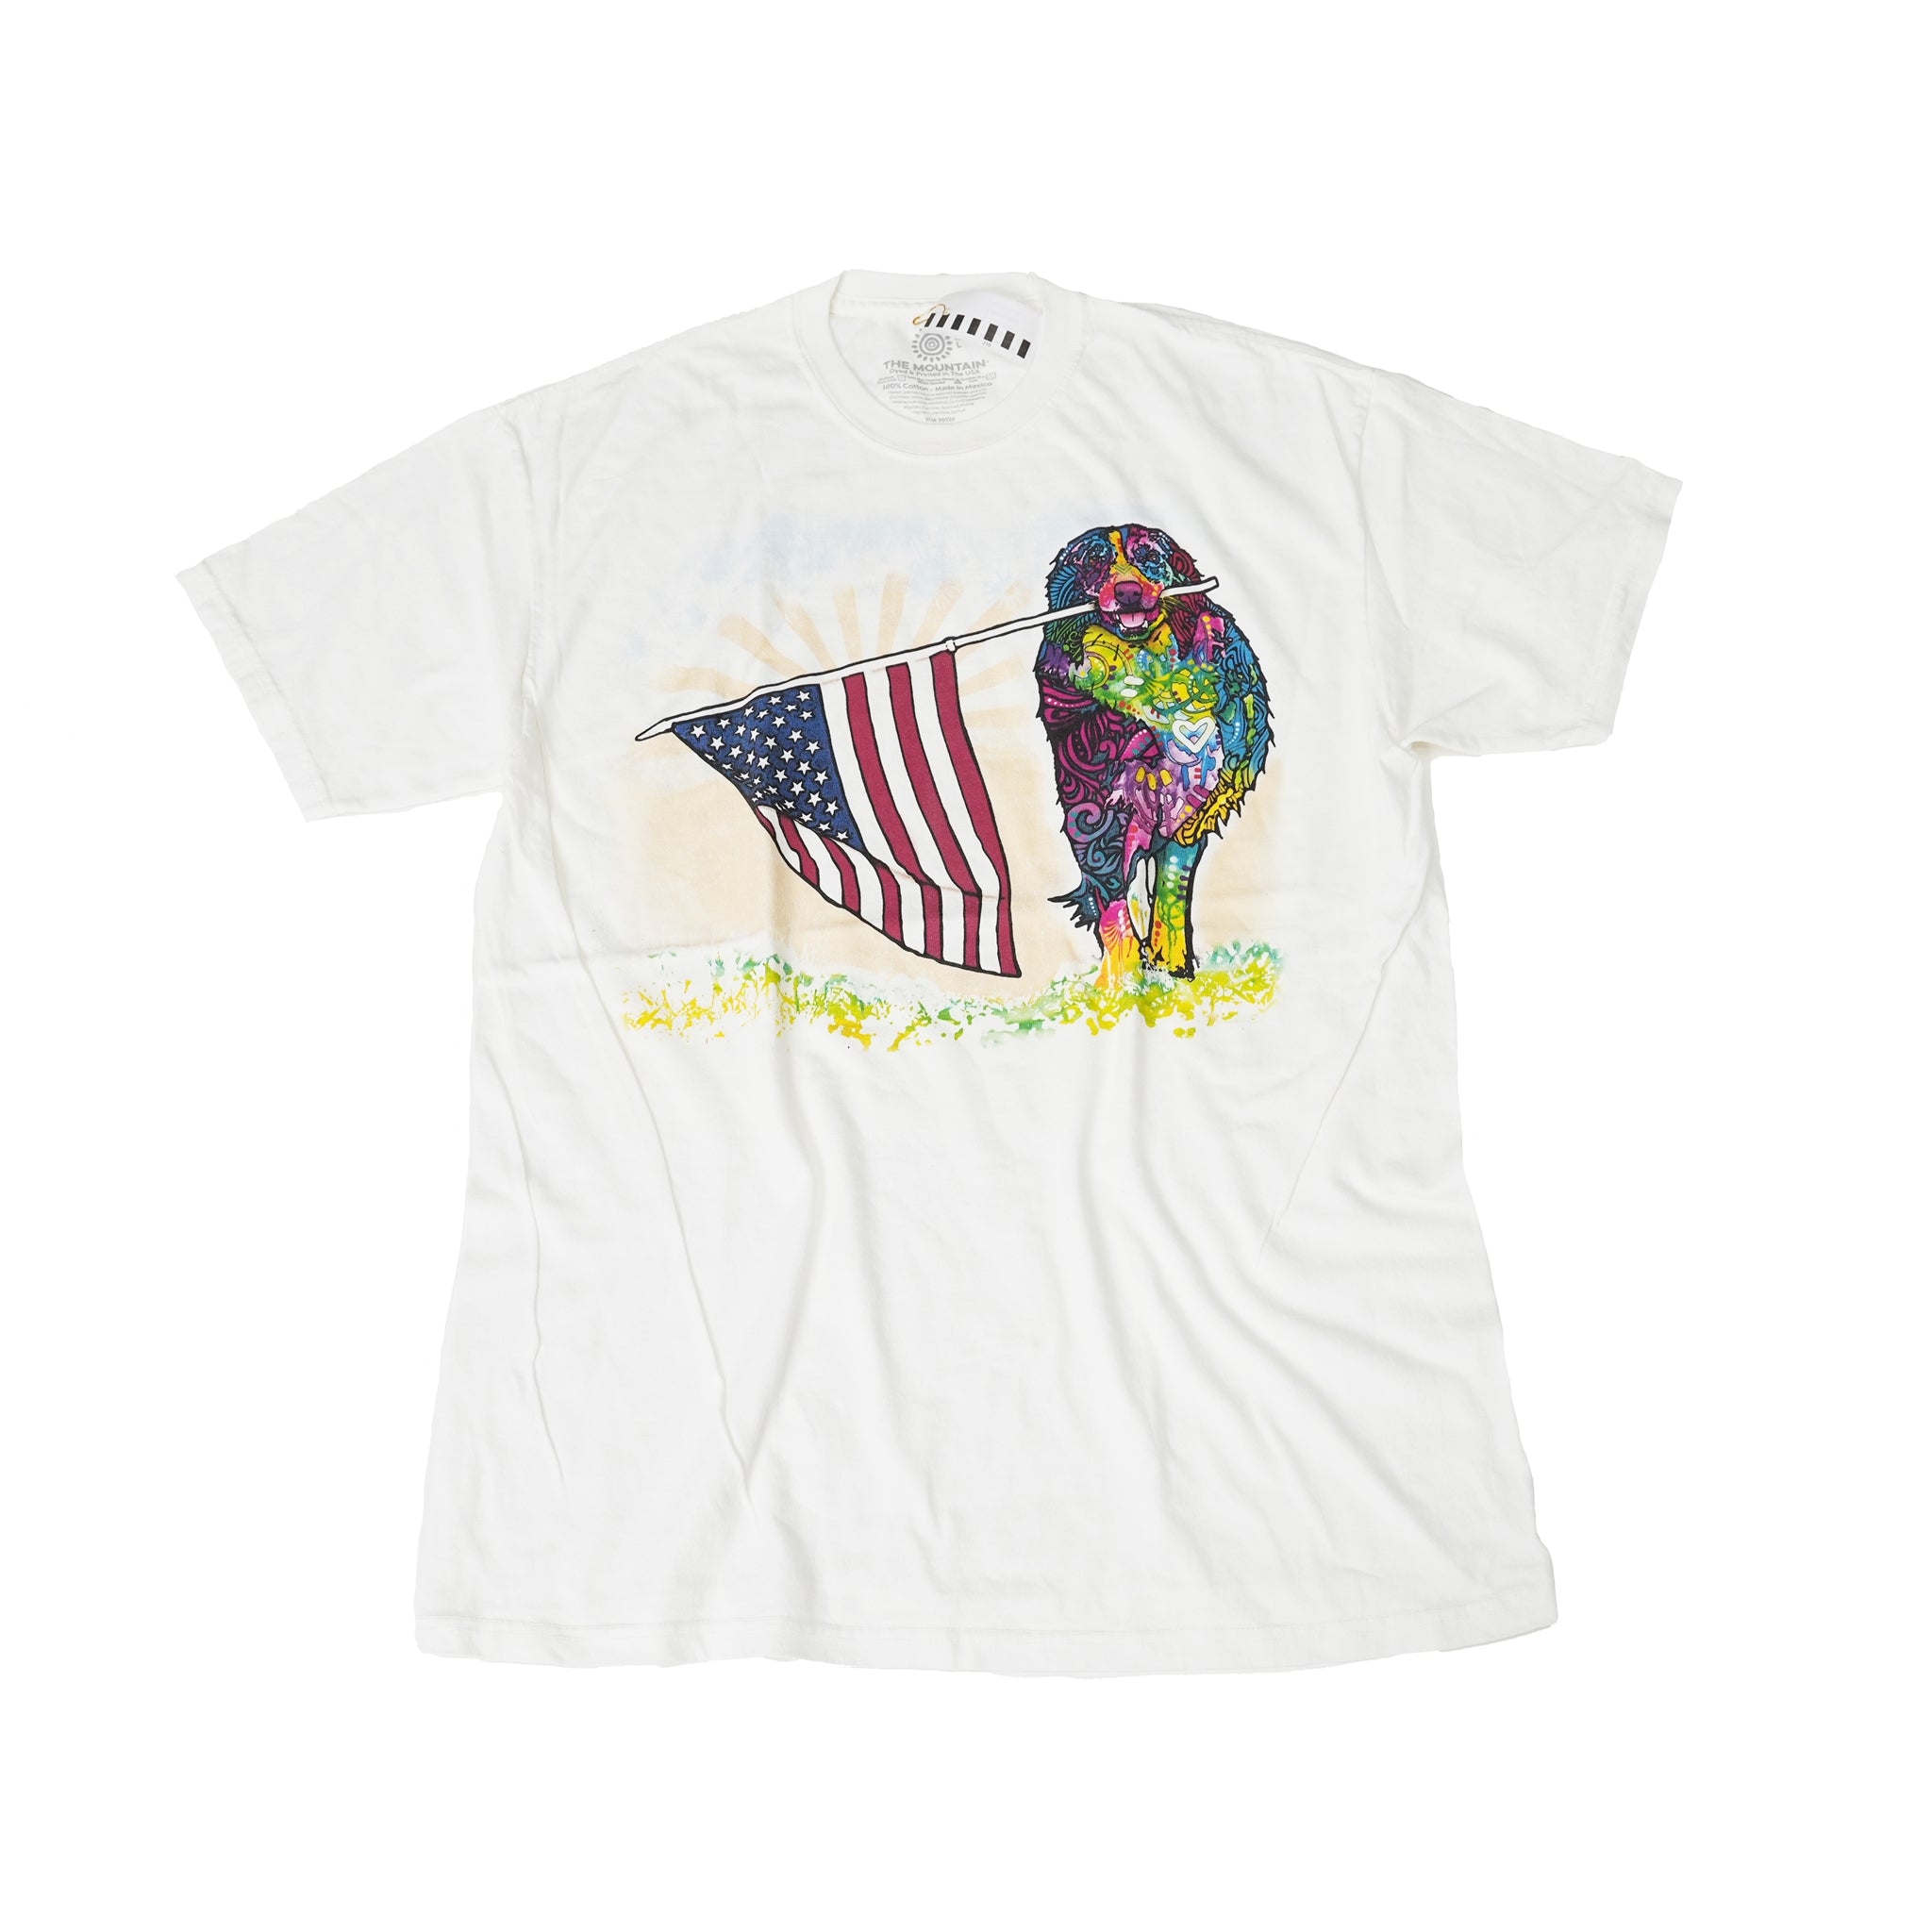 No:9198 | Name:Hand-Dyed Tee | Color:Russo Flag Up【THE MOUNTAIN】【ネコポス選択可能】